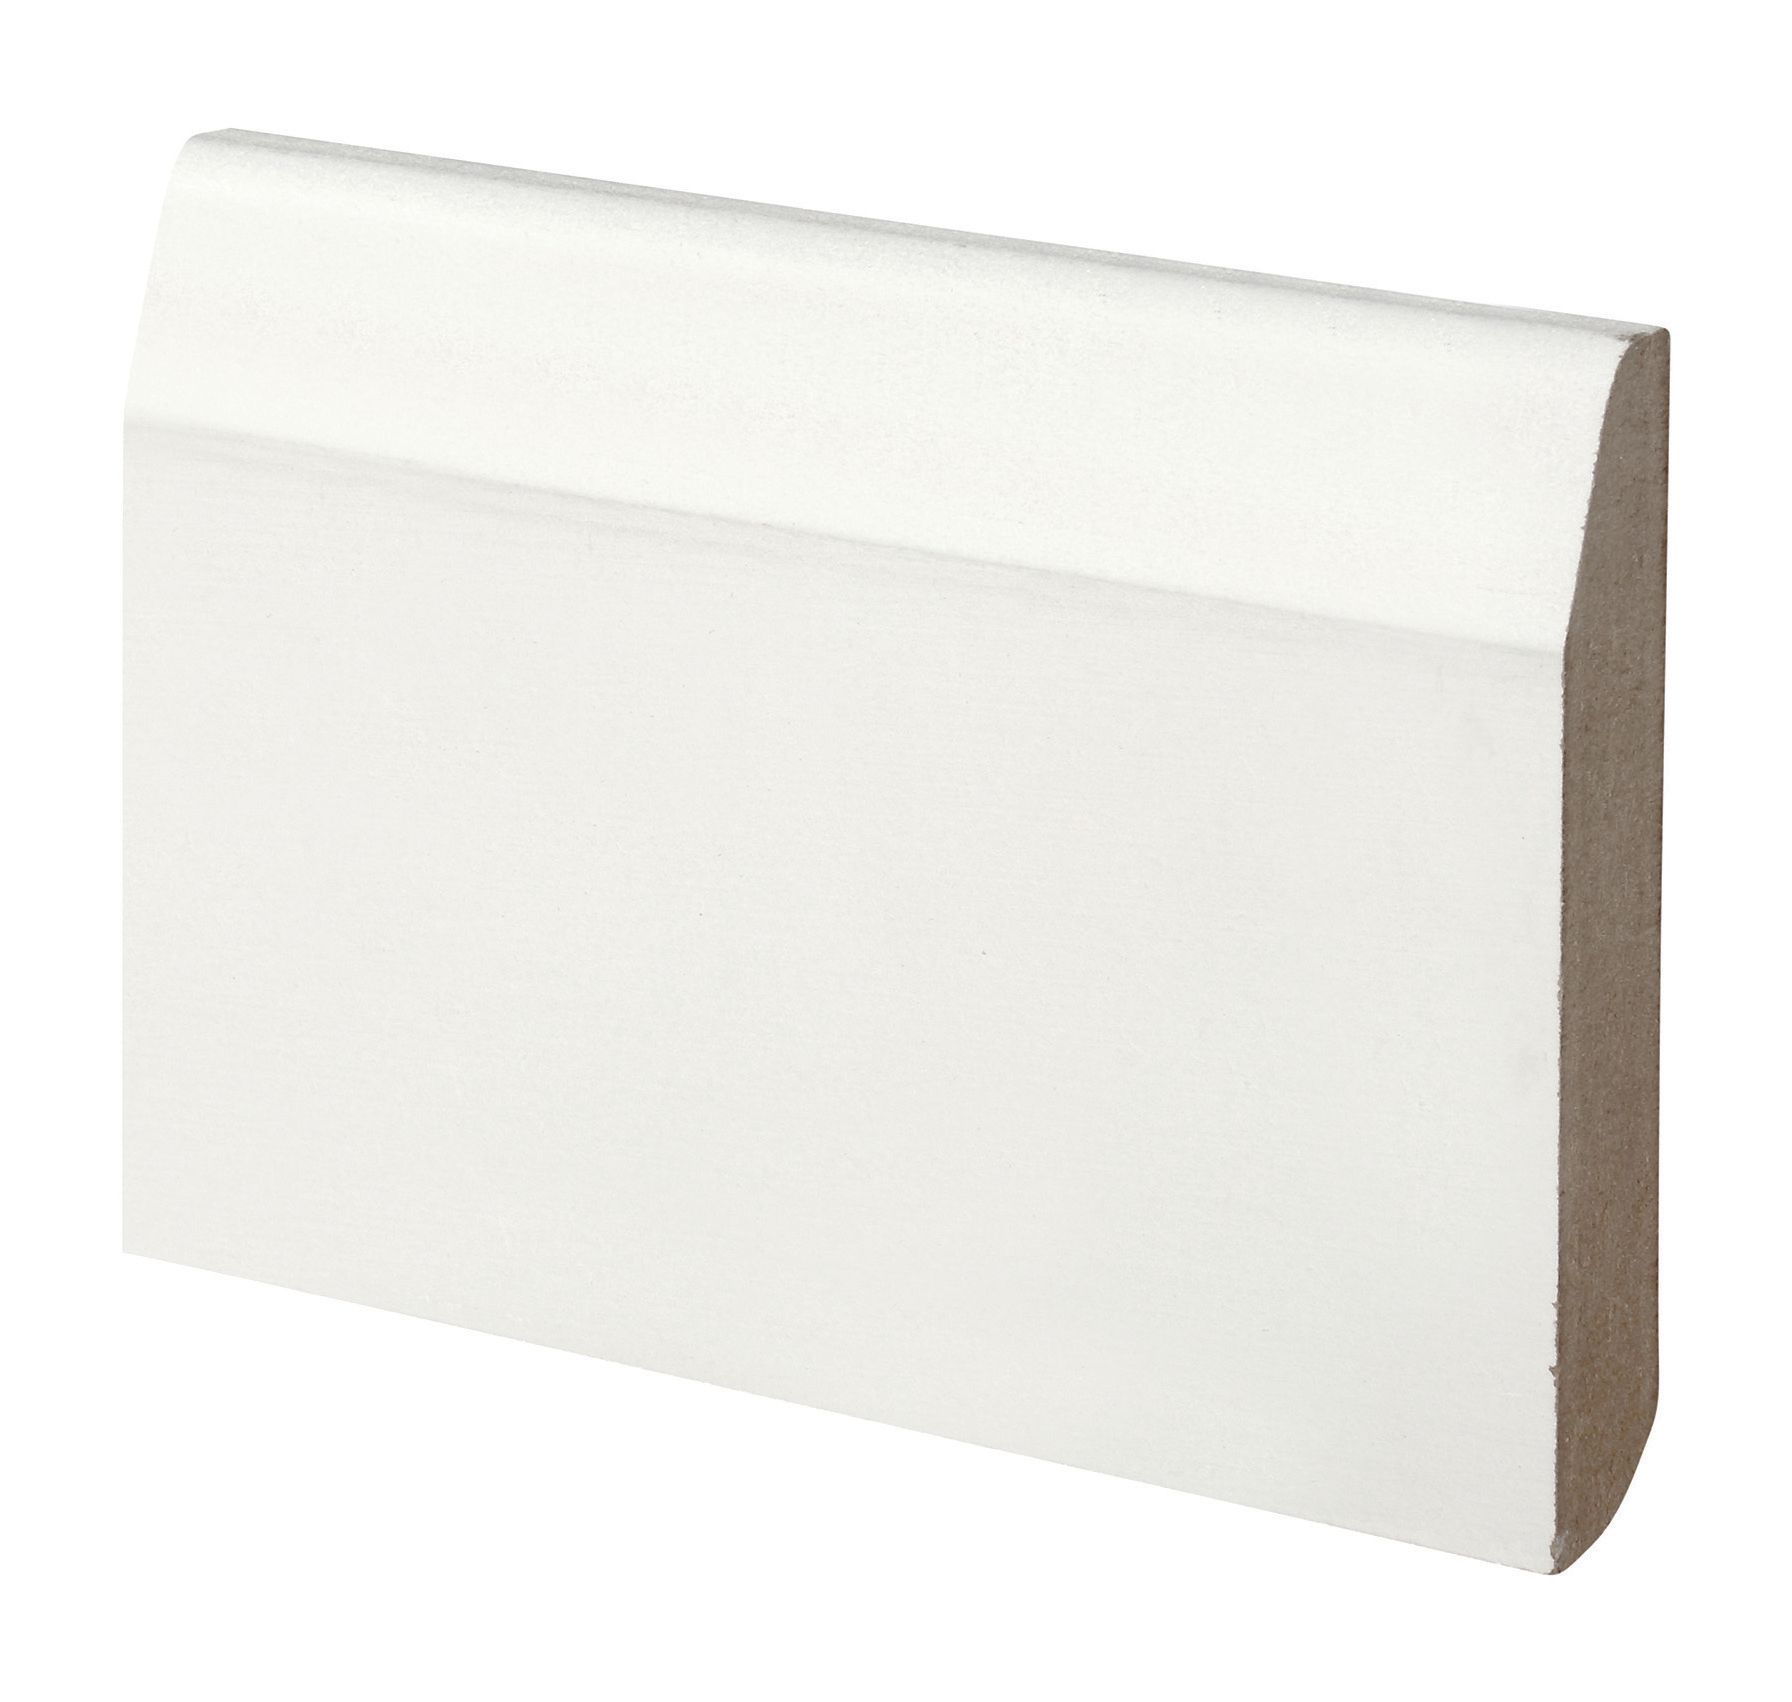 Image of Wickes Dual Purpose Chamfered/Bullnose Primed MDF Skirting - 14.5 x 94 x 2400mm